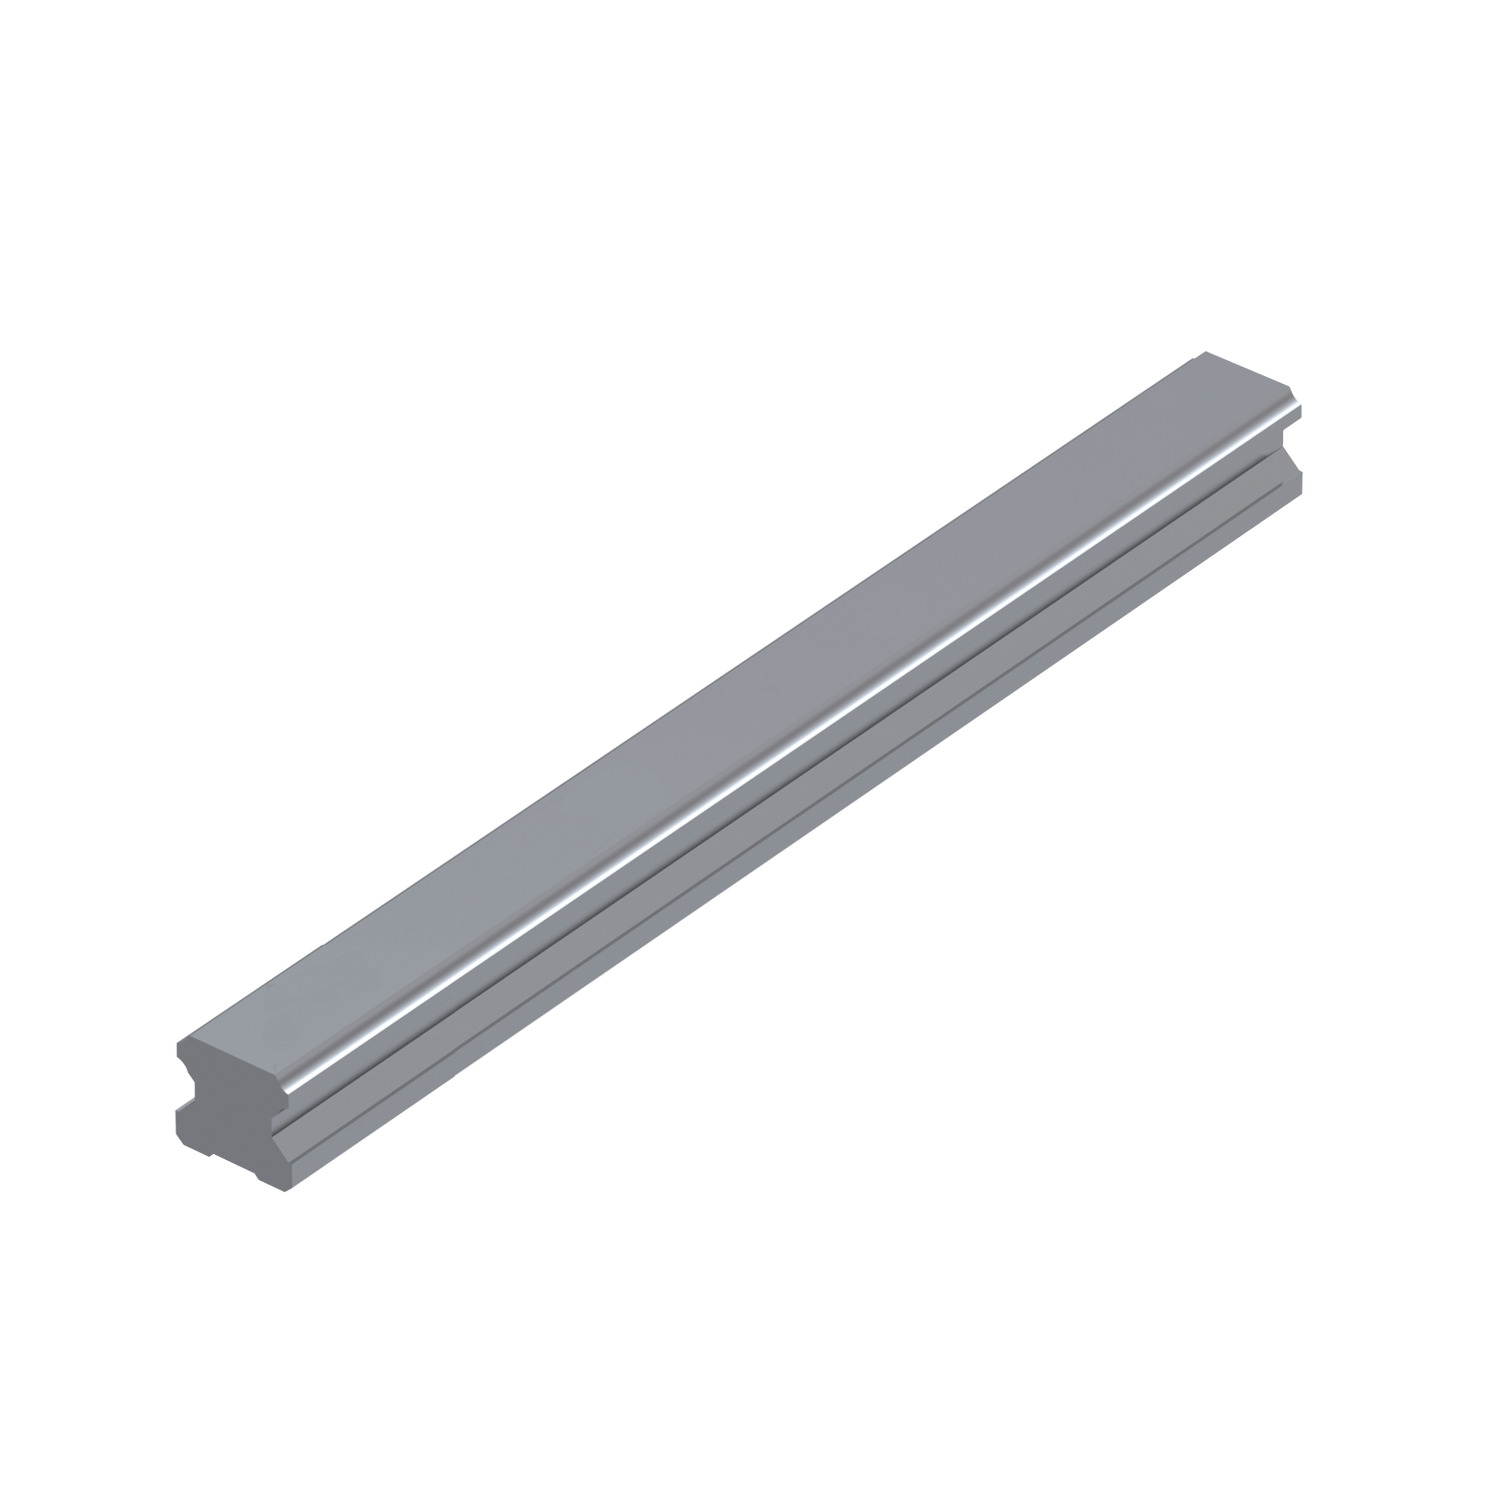 L1016.RF30-1080 Linear guide rail rear fixing 30mm 1080 Hardened and ground steel. EC:20168087 WG:05063055296731